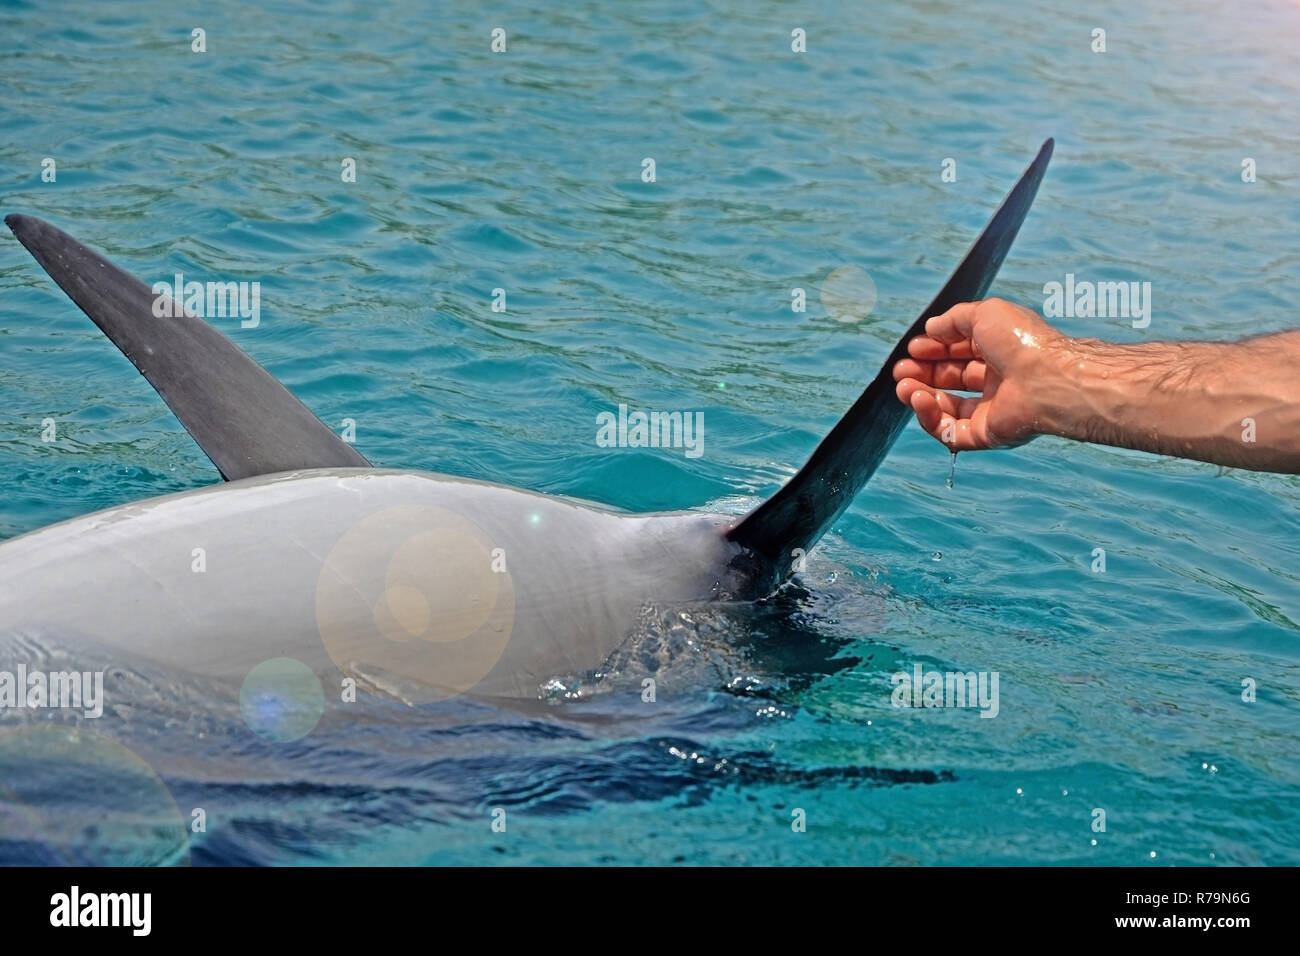 The rescued smiling dolphin holds its flippers with human hands. Sea dolphin Conservation Research Project in Eilat, Israel. saving animals, trusting  Stock Photo